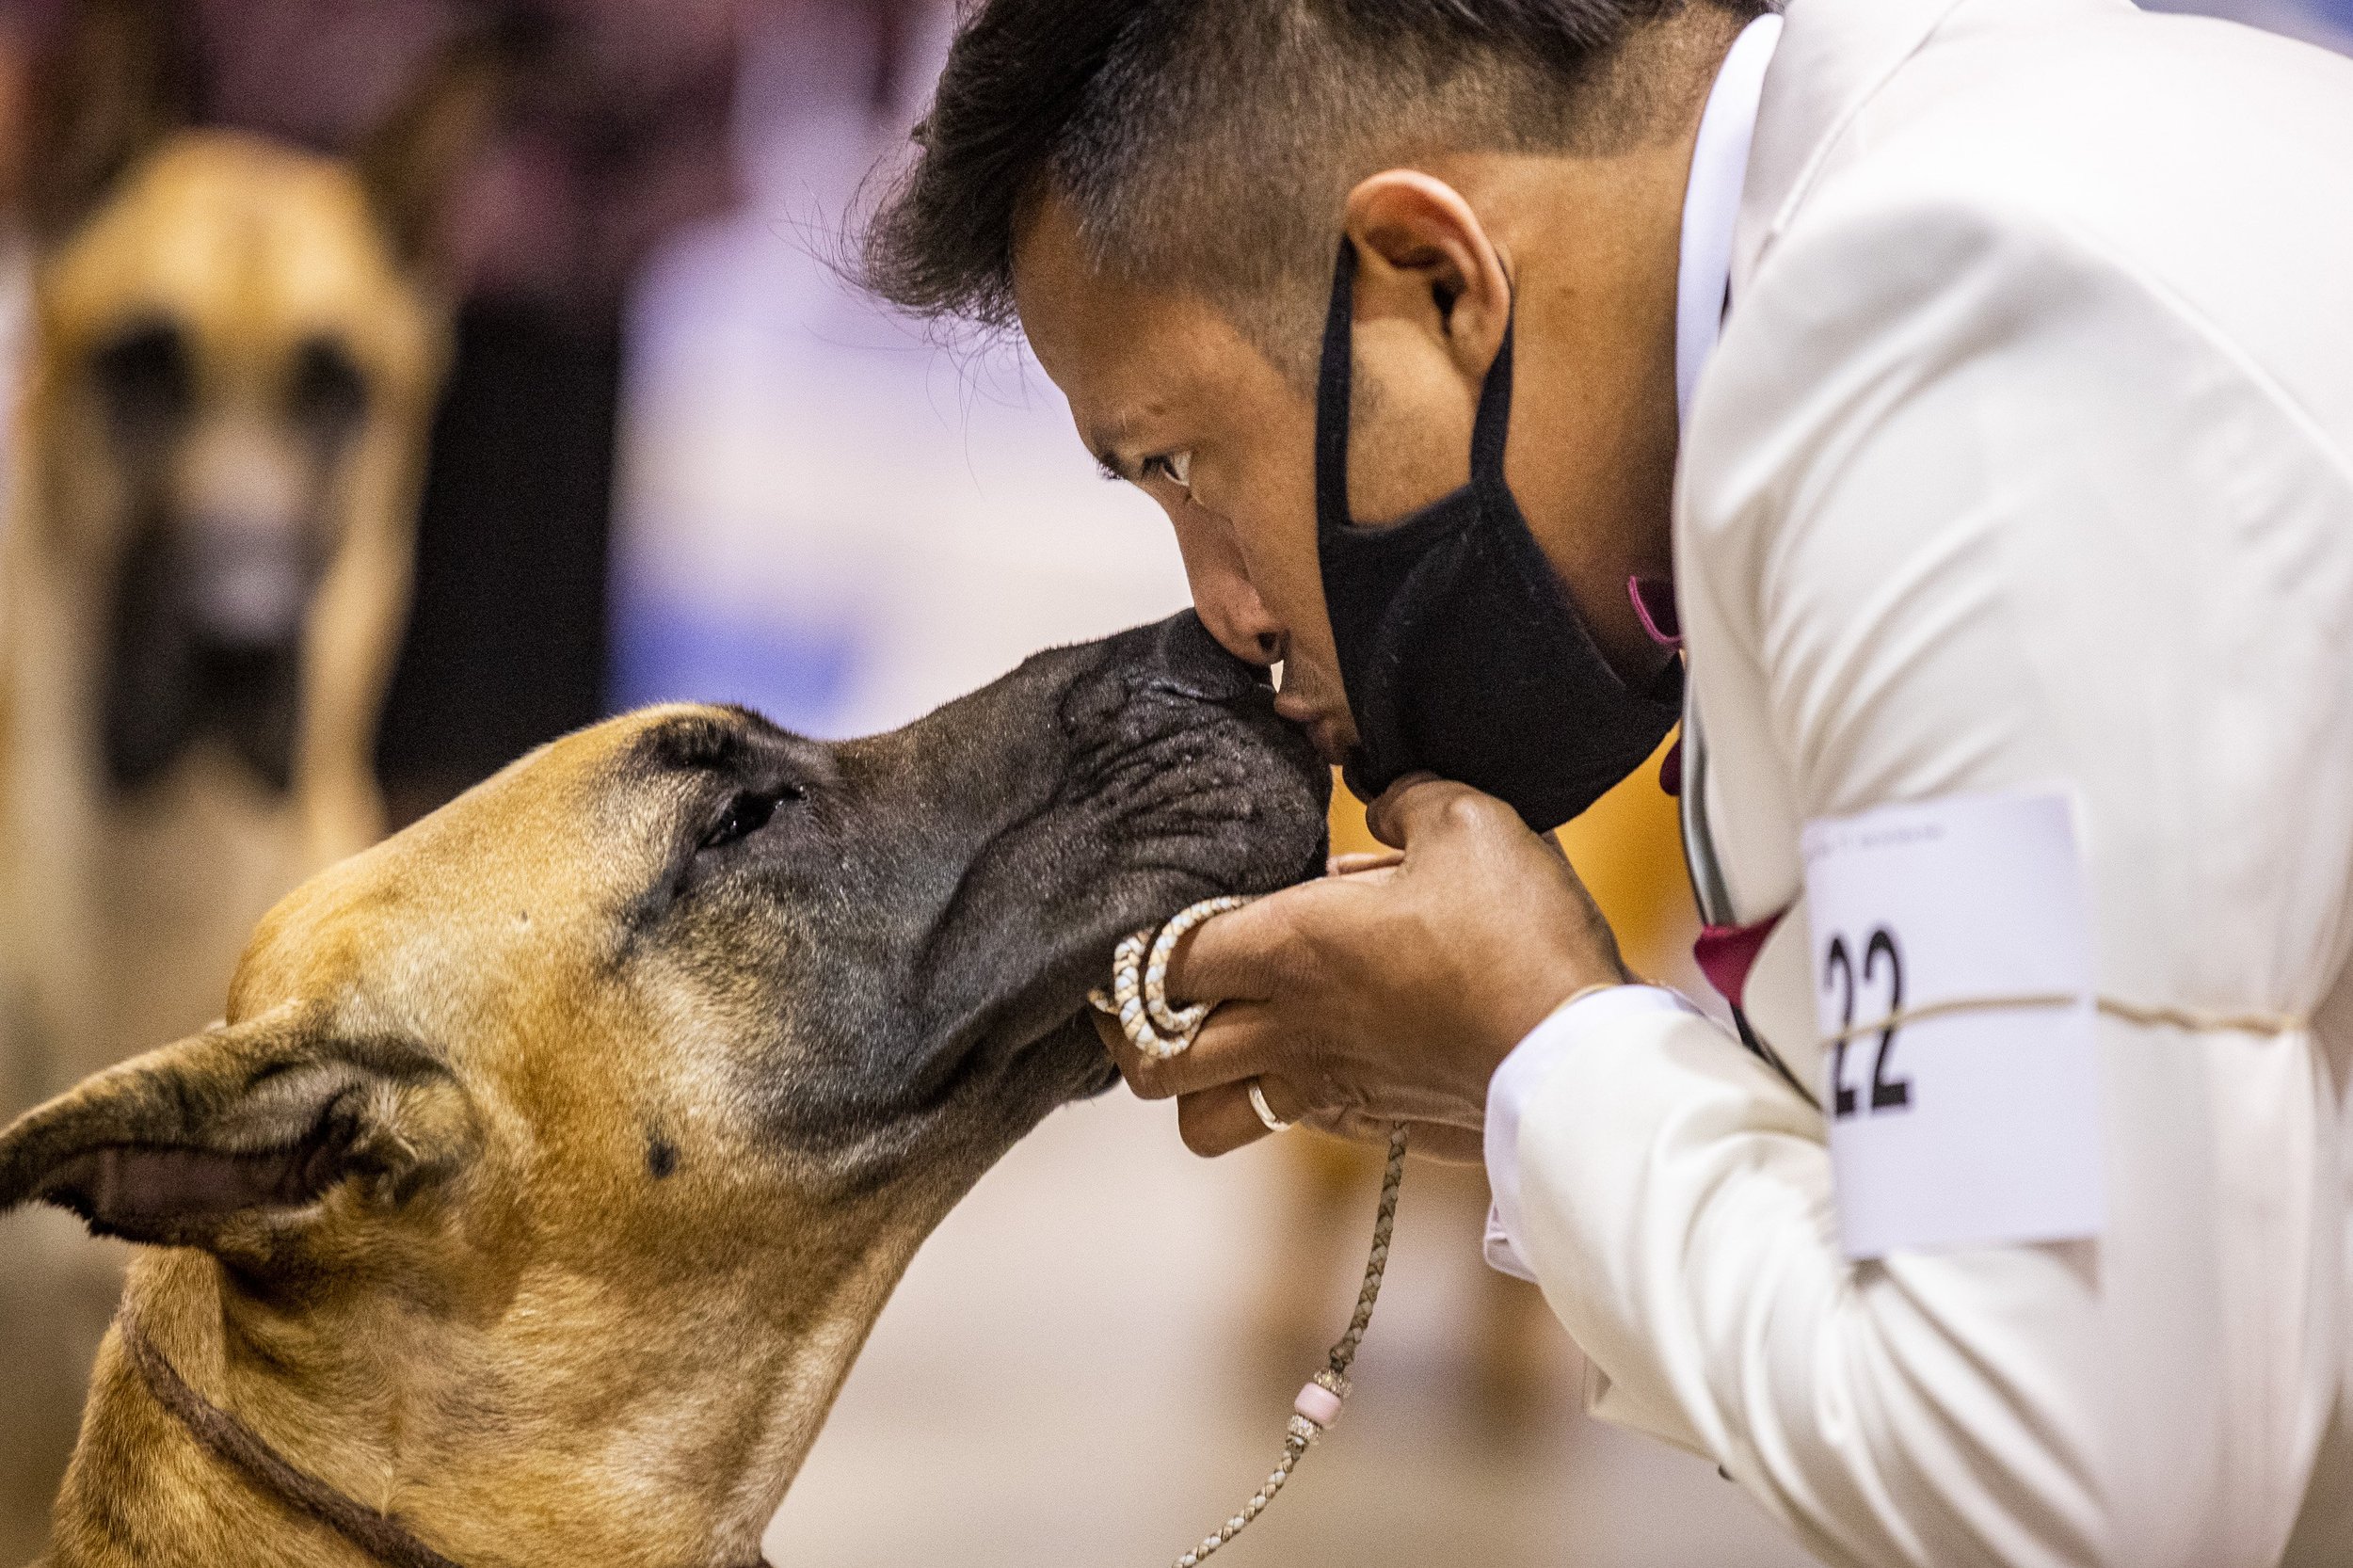  Frankie Camacho of St. Louis shares a moment with his Great Dane, Dauphine, during the AKC National Championship at Orange County Convention Center on Friday, Dec. 11, 2020.  